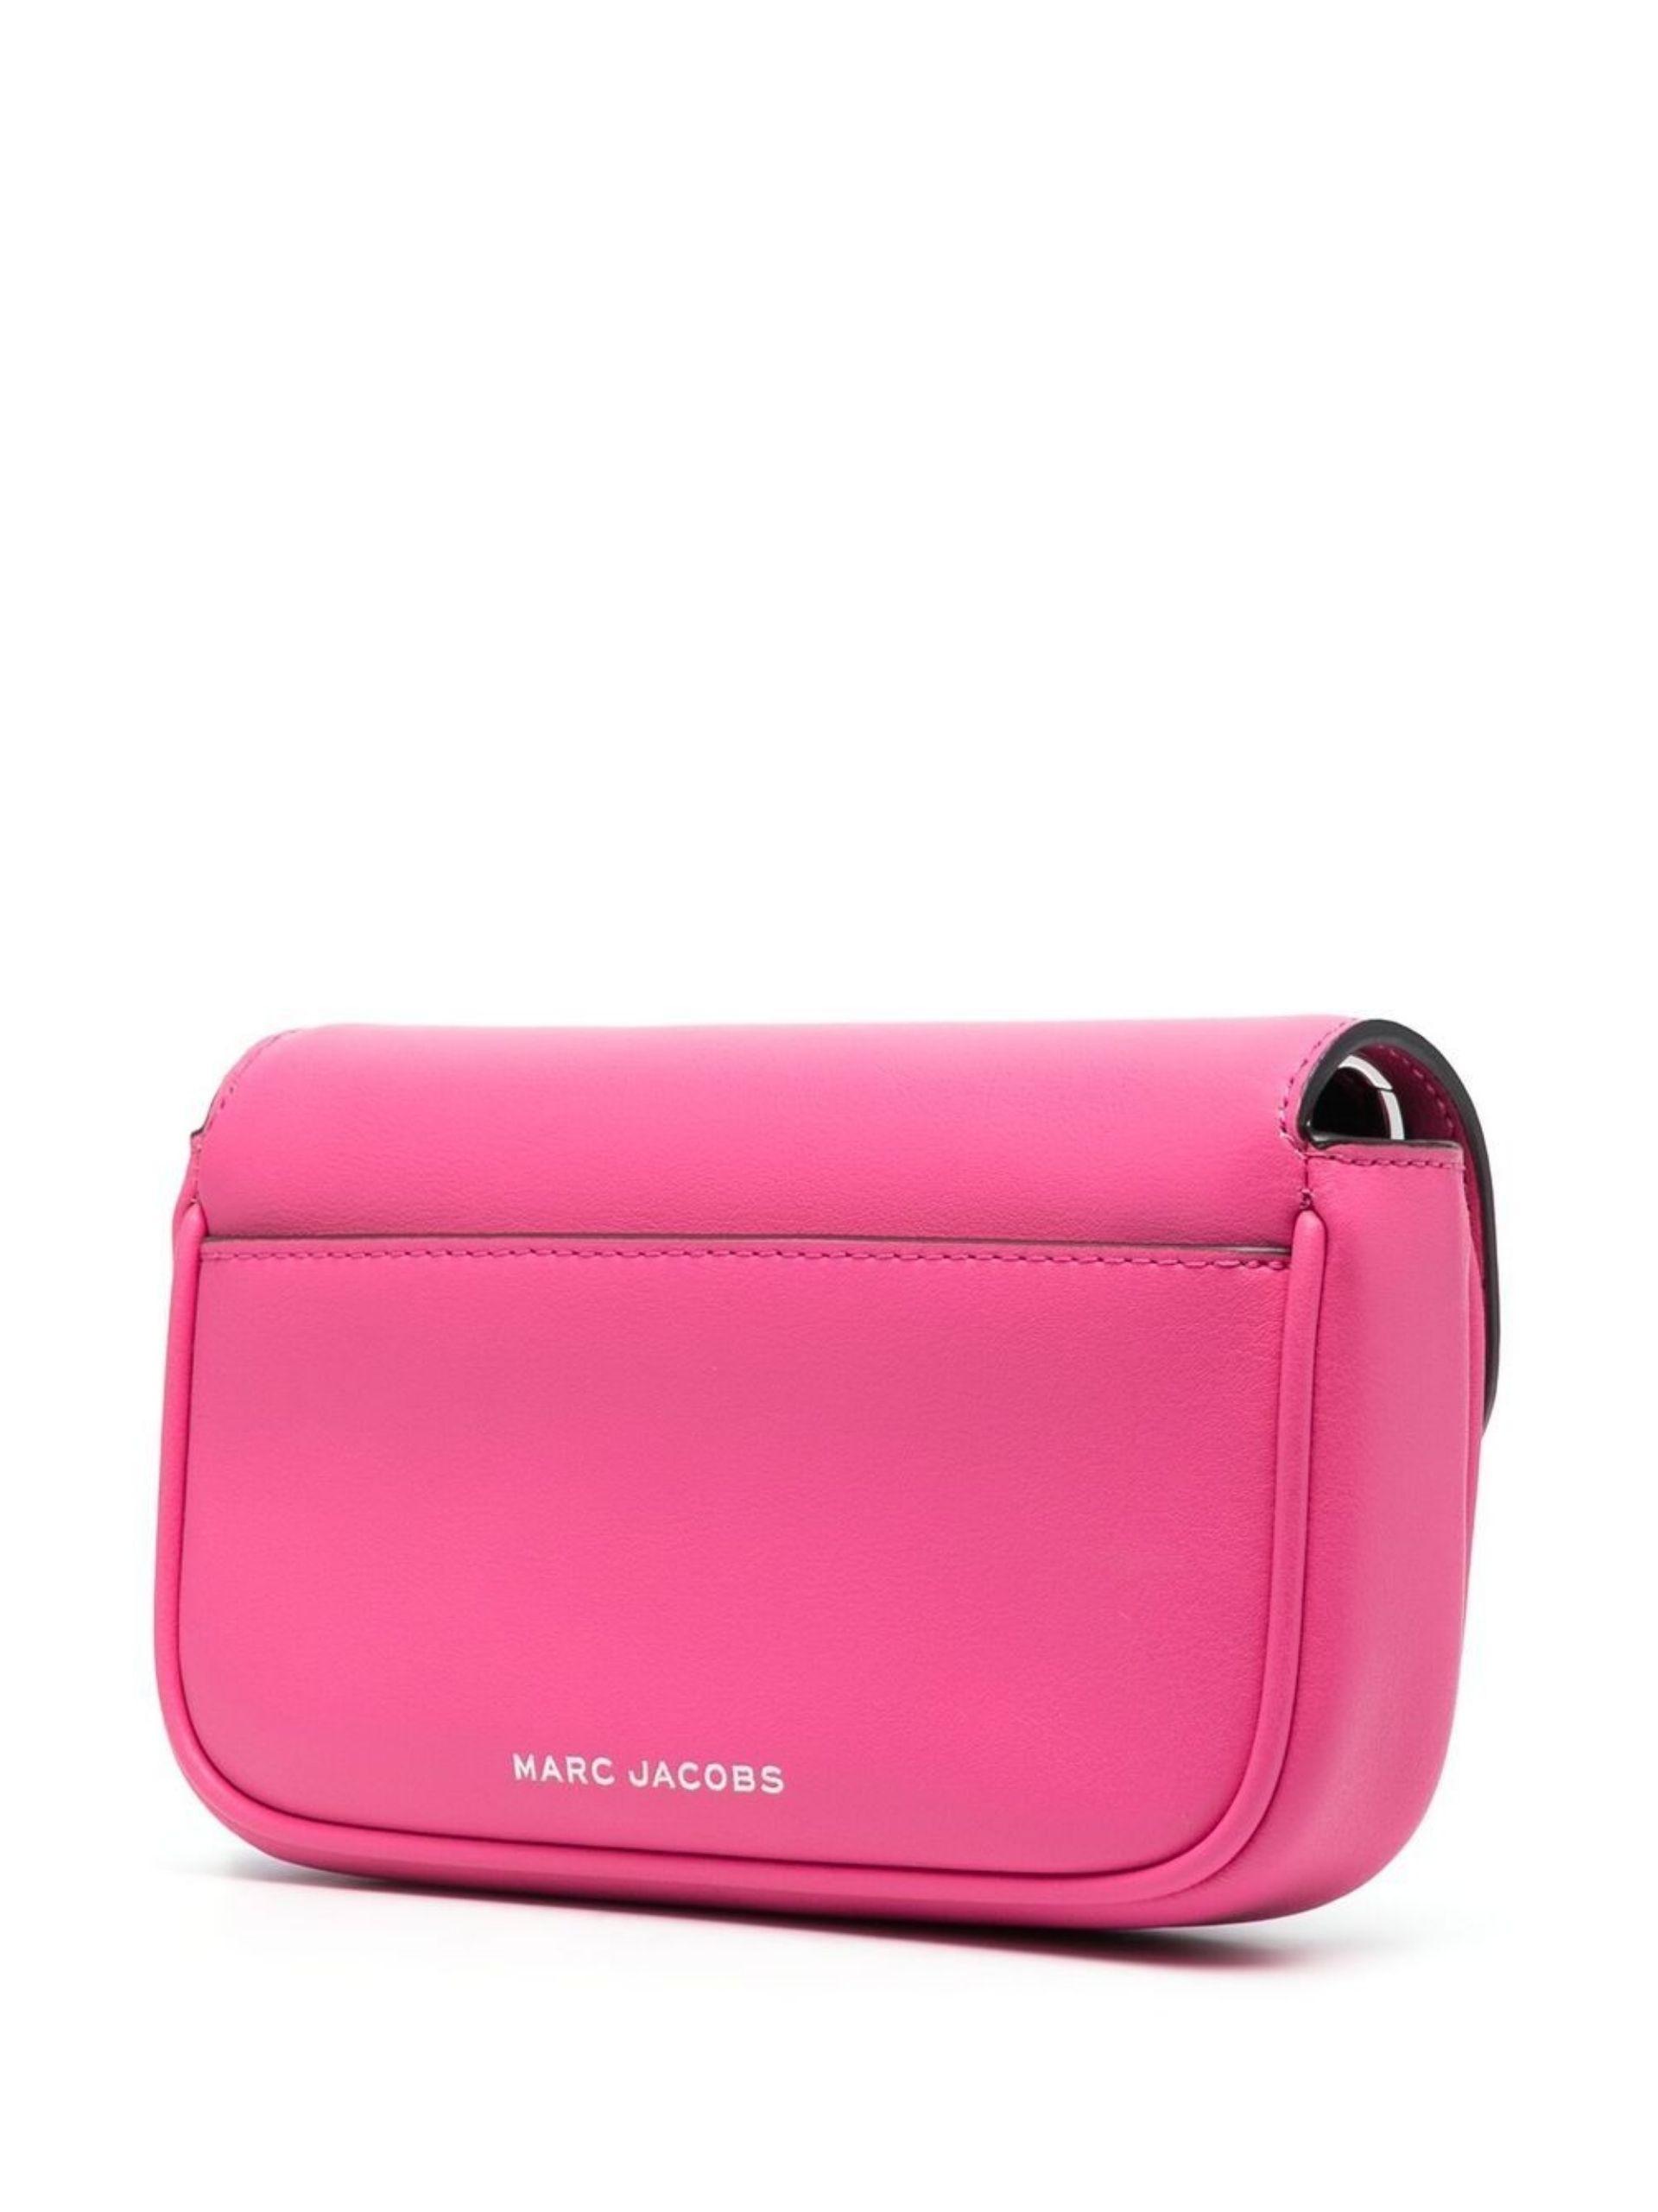 Marc Jacobs J Marc Chain Strap Leather Shoulder Bag in Pink | Lyst